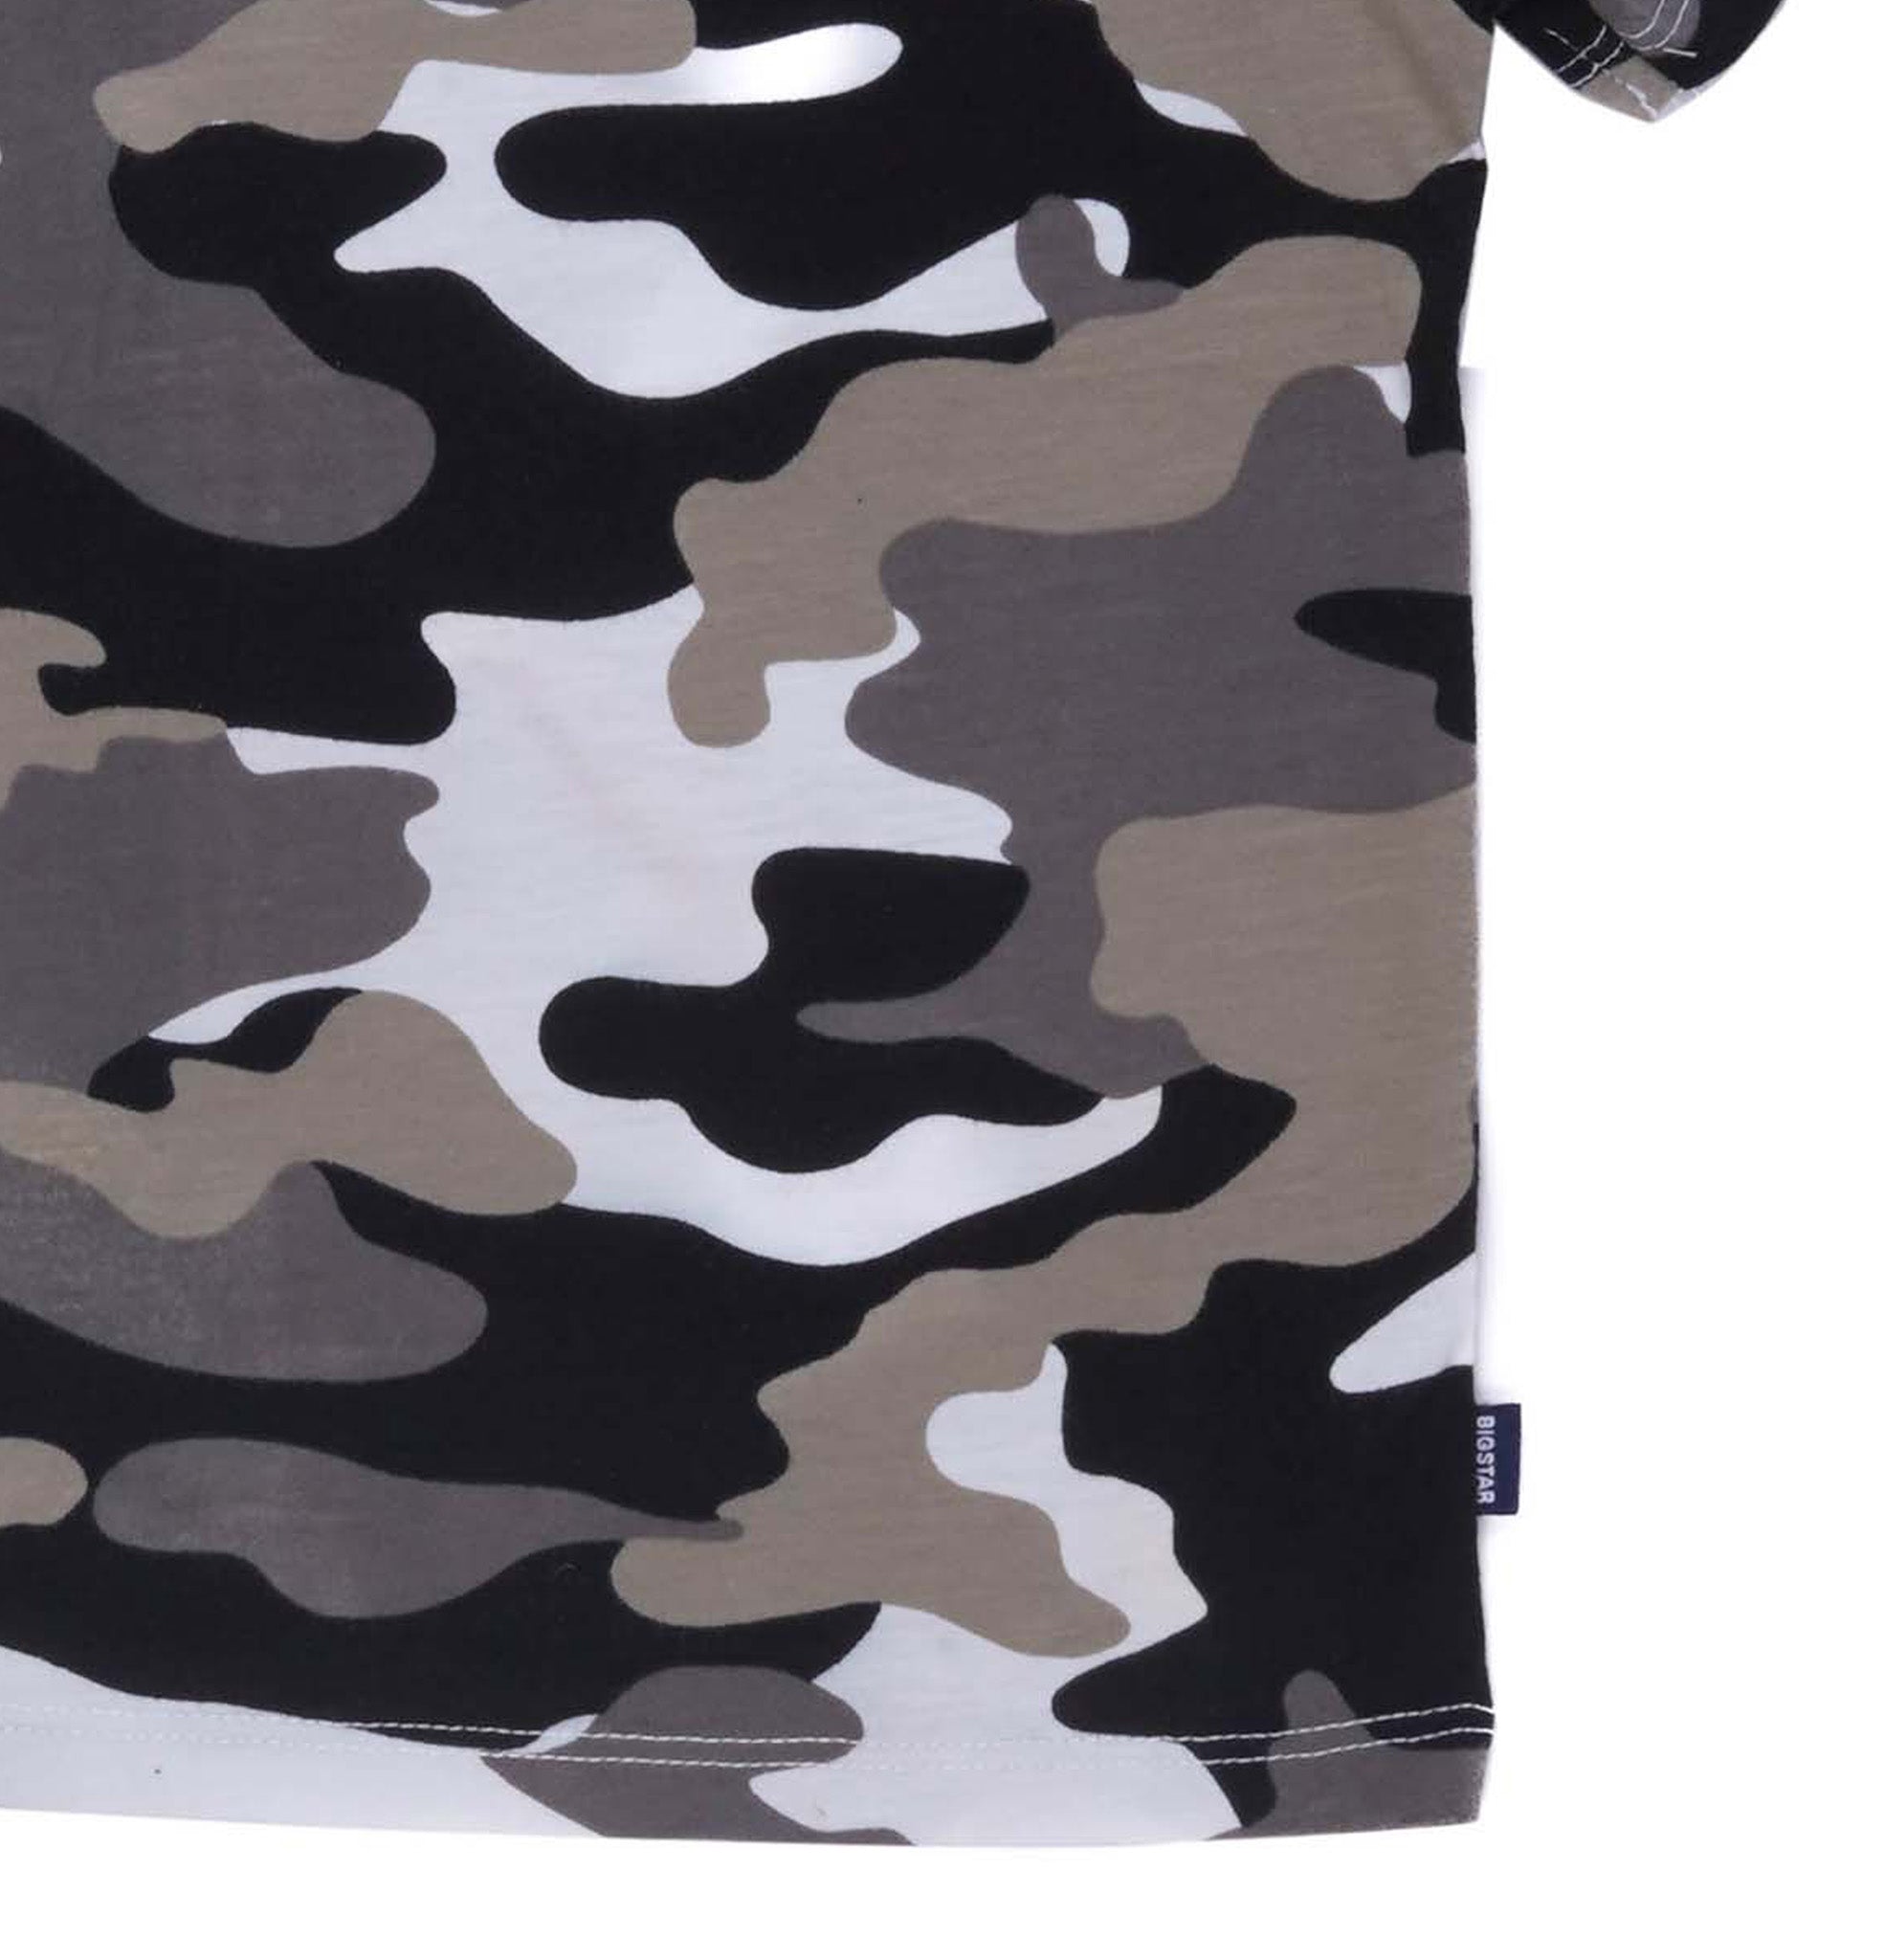 B.I.G S.T.A.R-ROUND NECK T-SHIRT CAMOUFLAGE KDS